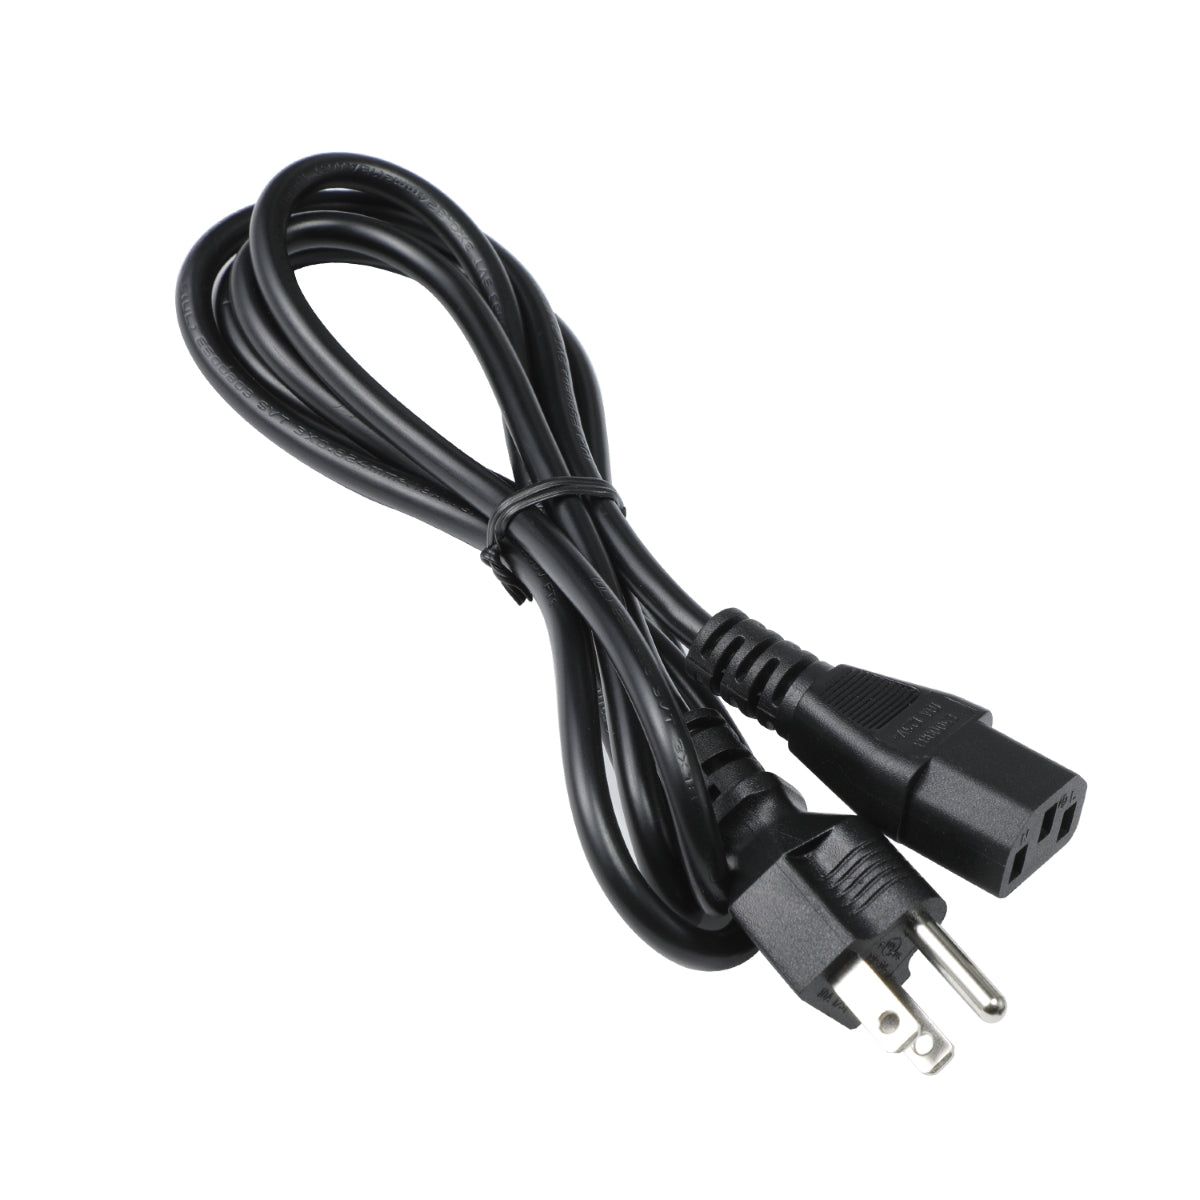 Power Cord for Acer CB281HK Monitor.